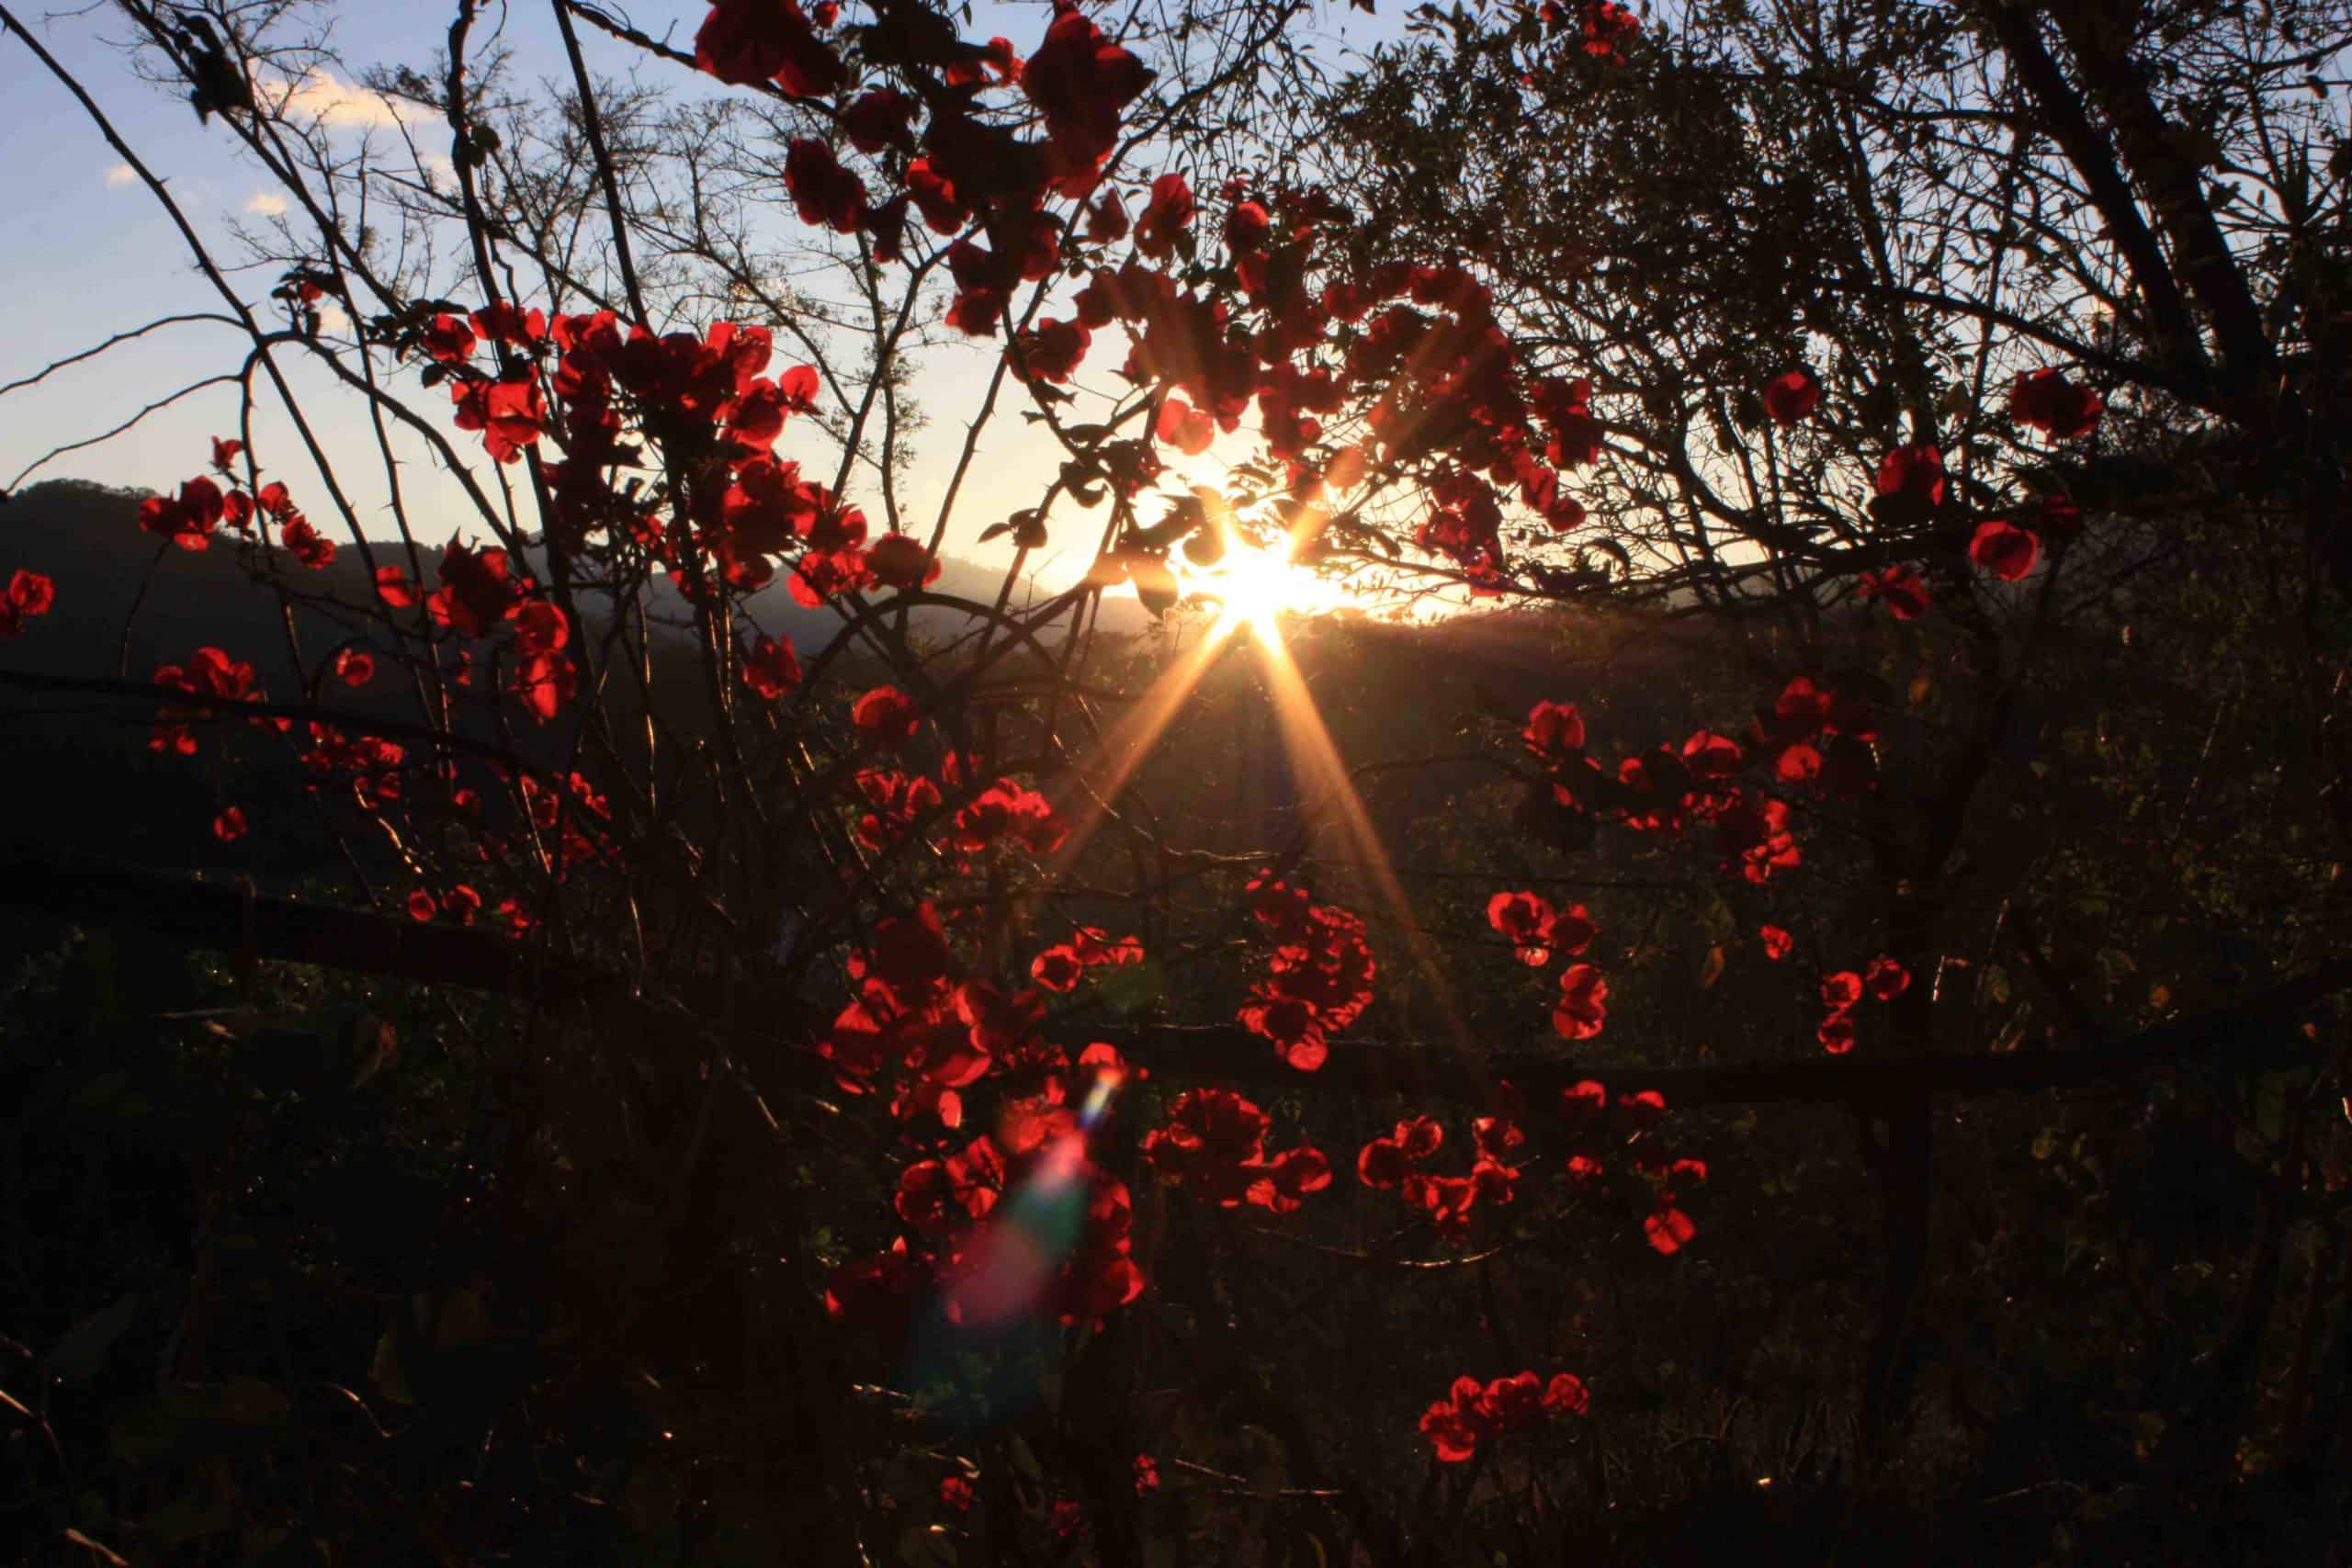 A photograph of the setting sun shining through red-pink flowers and dark branches.